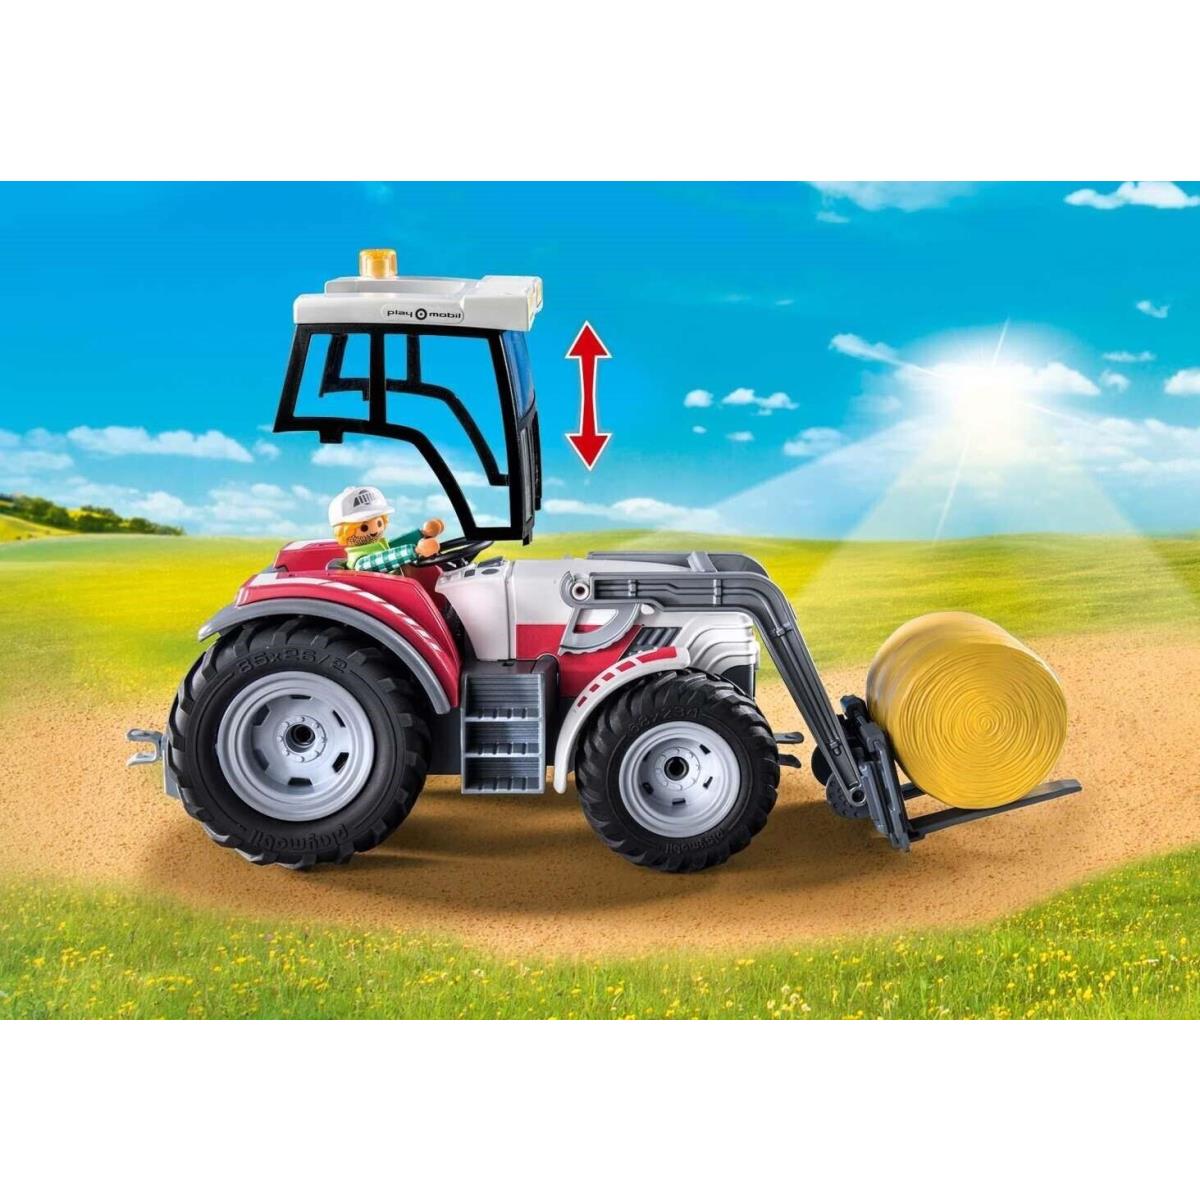 Playmobil 71305 Large Farm Tractor w/ Accessories